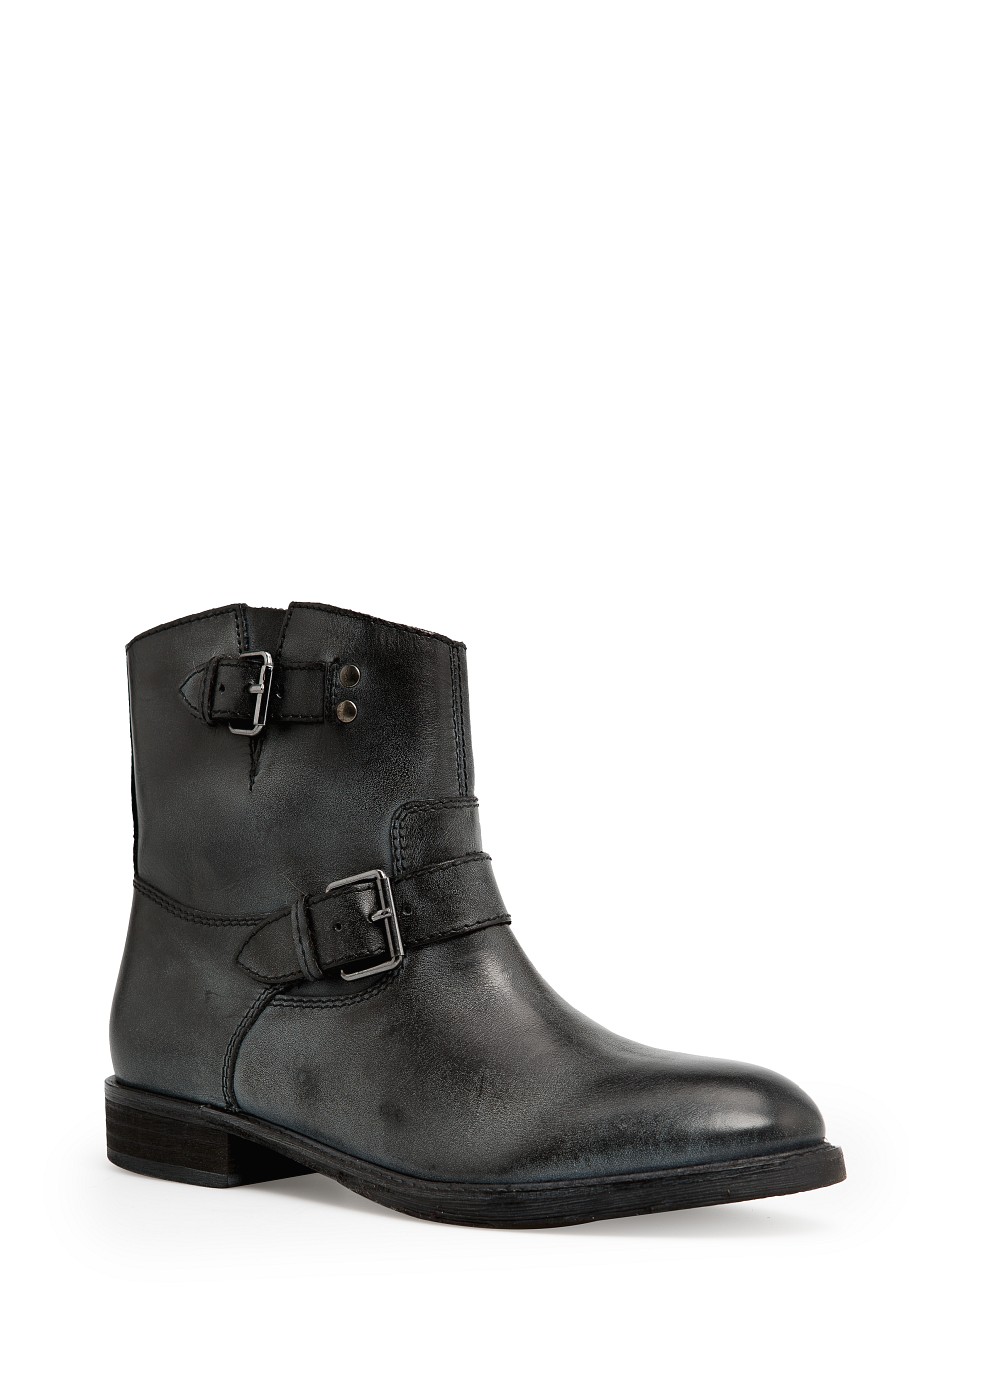 Lyst - Mango Buckle Leather Ankle Boots in Black